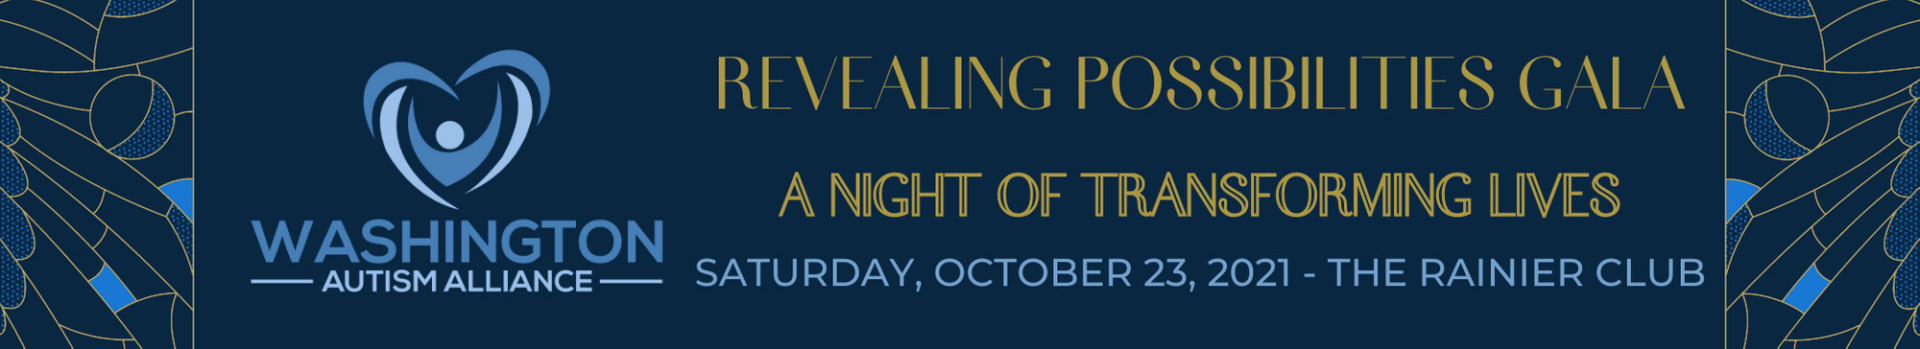 Night Out Gala Oct 23 2021 Banner